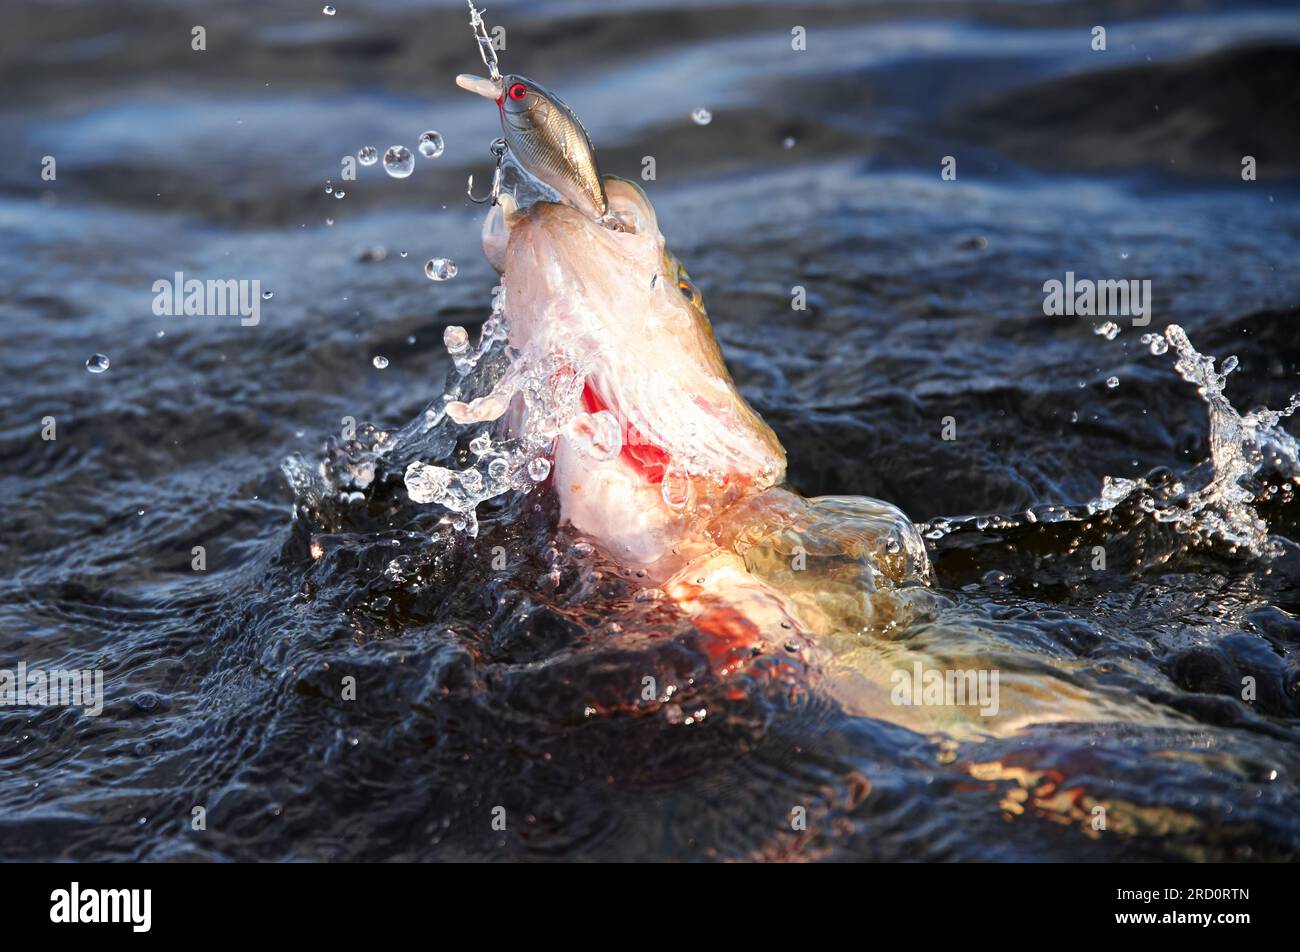 Nokia, Finland - July 15, 2023: Hooked European perch jumping and fighting in a lake caught with a wobbler lure by fisherman in Western Finland in Jul Stock Photo